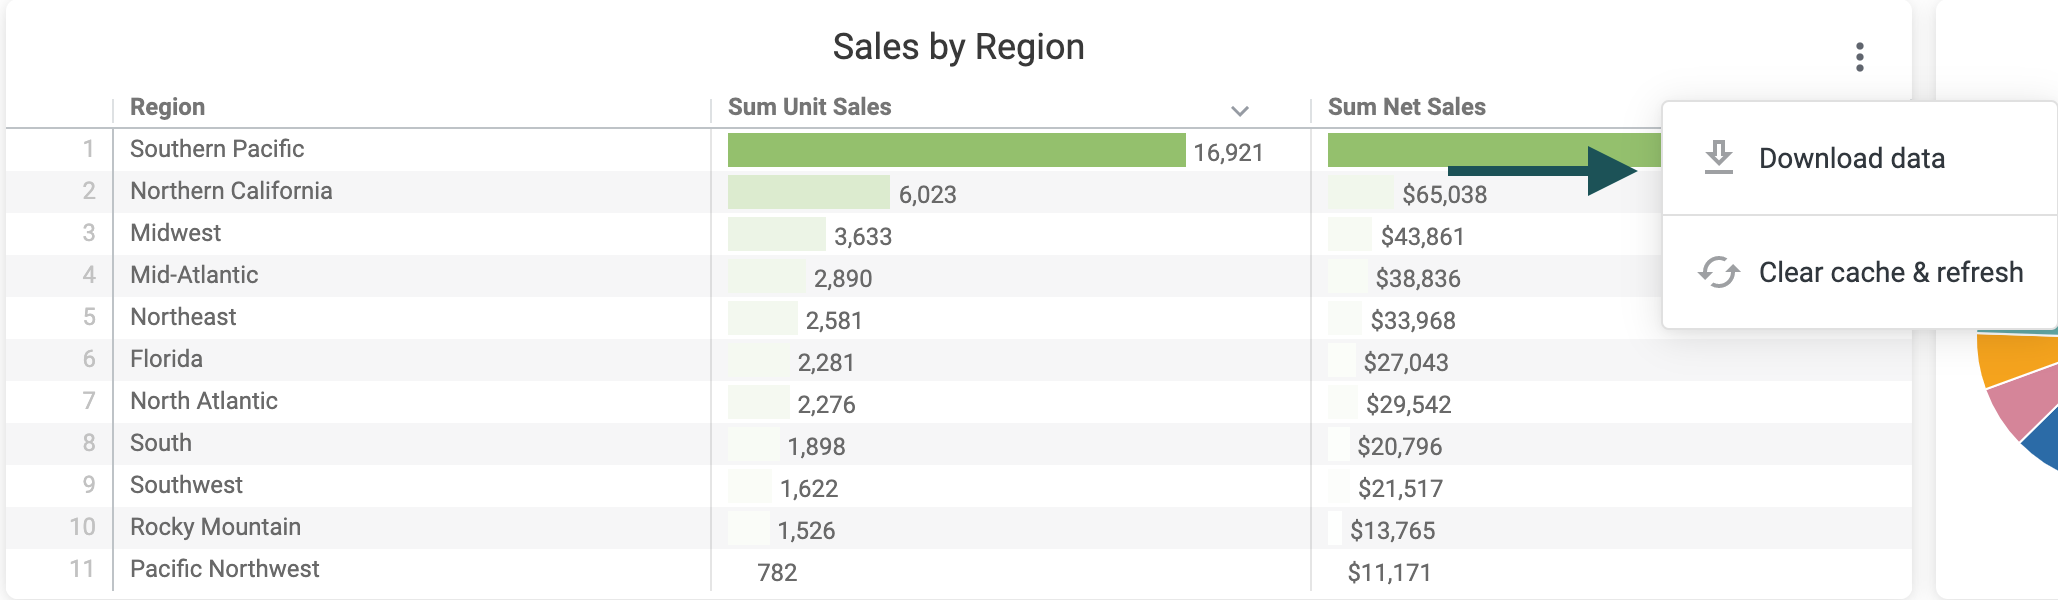 Sales_by_Region_Download_data.png